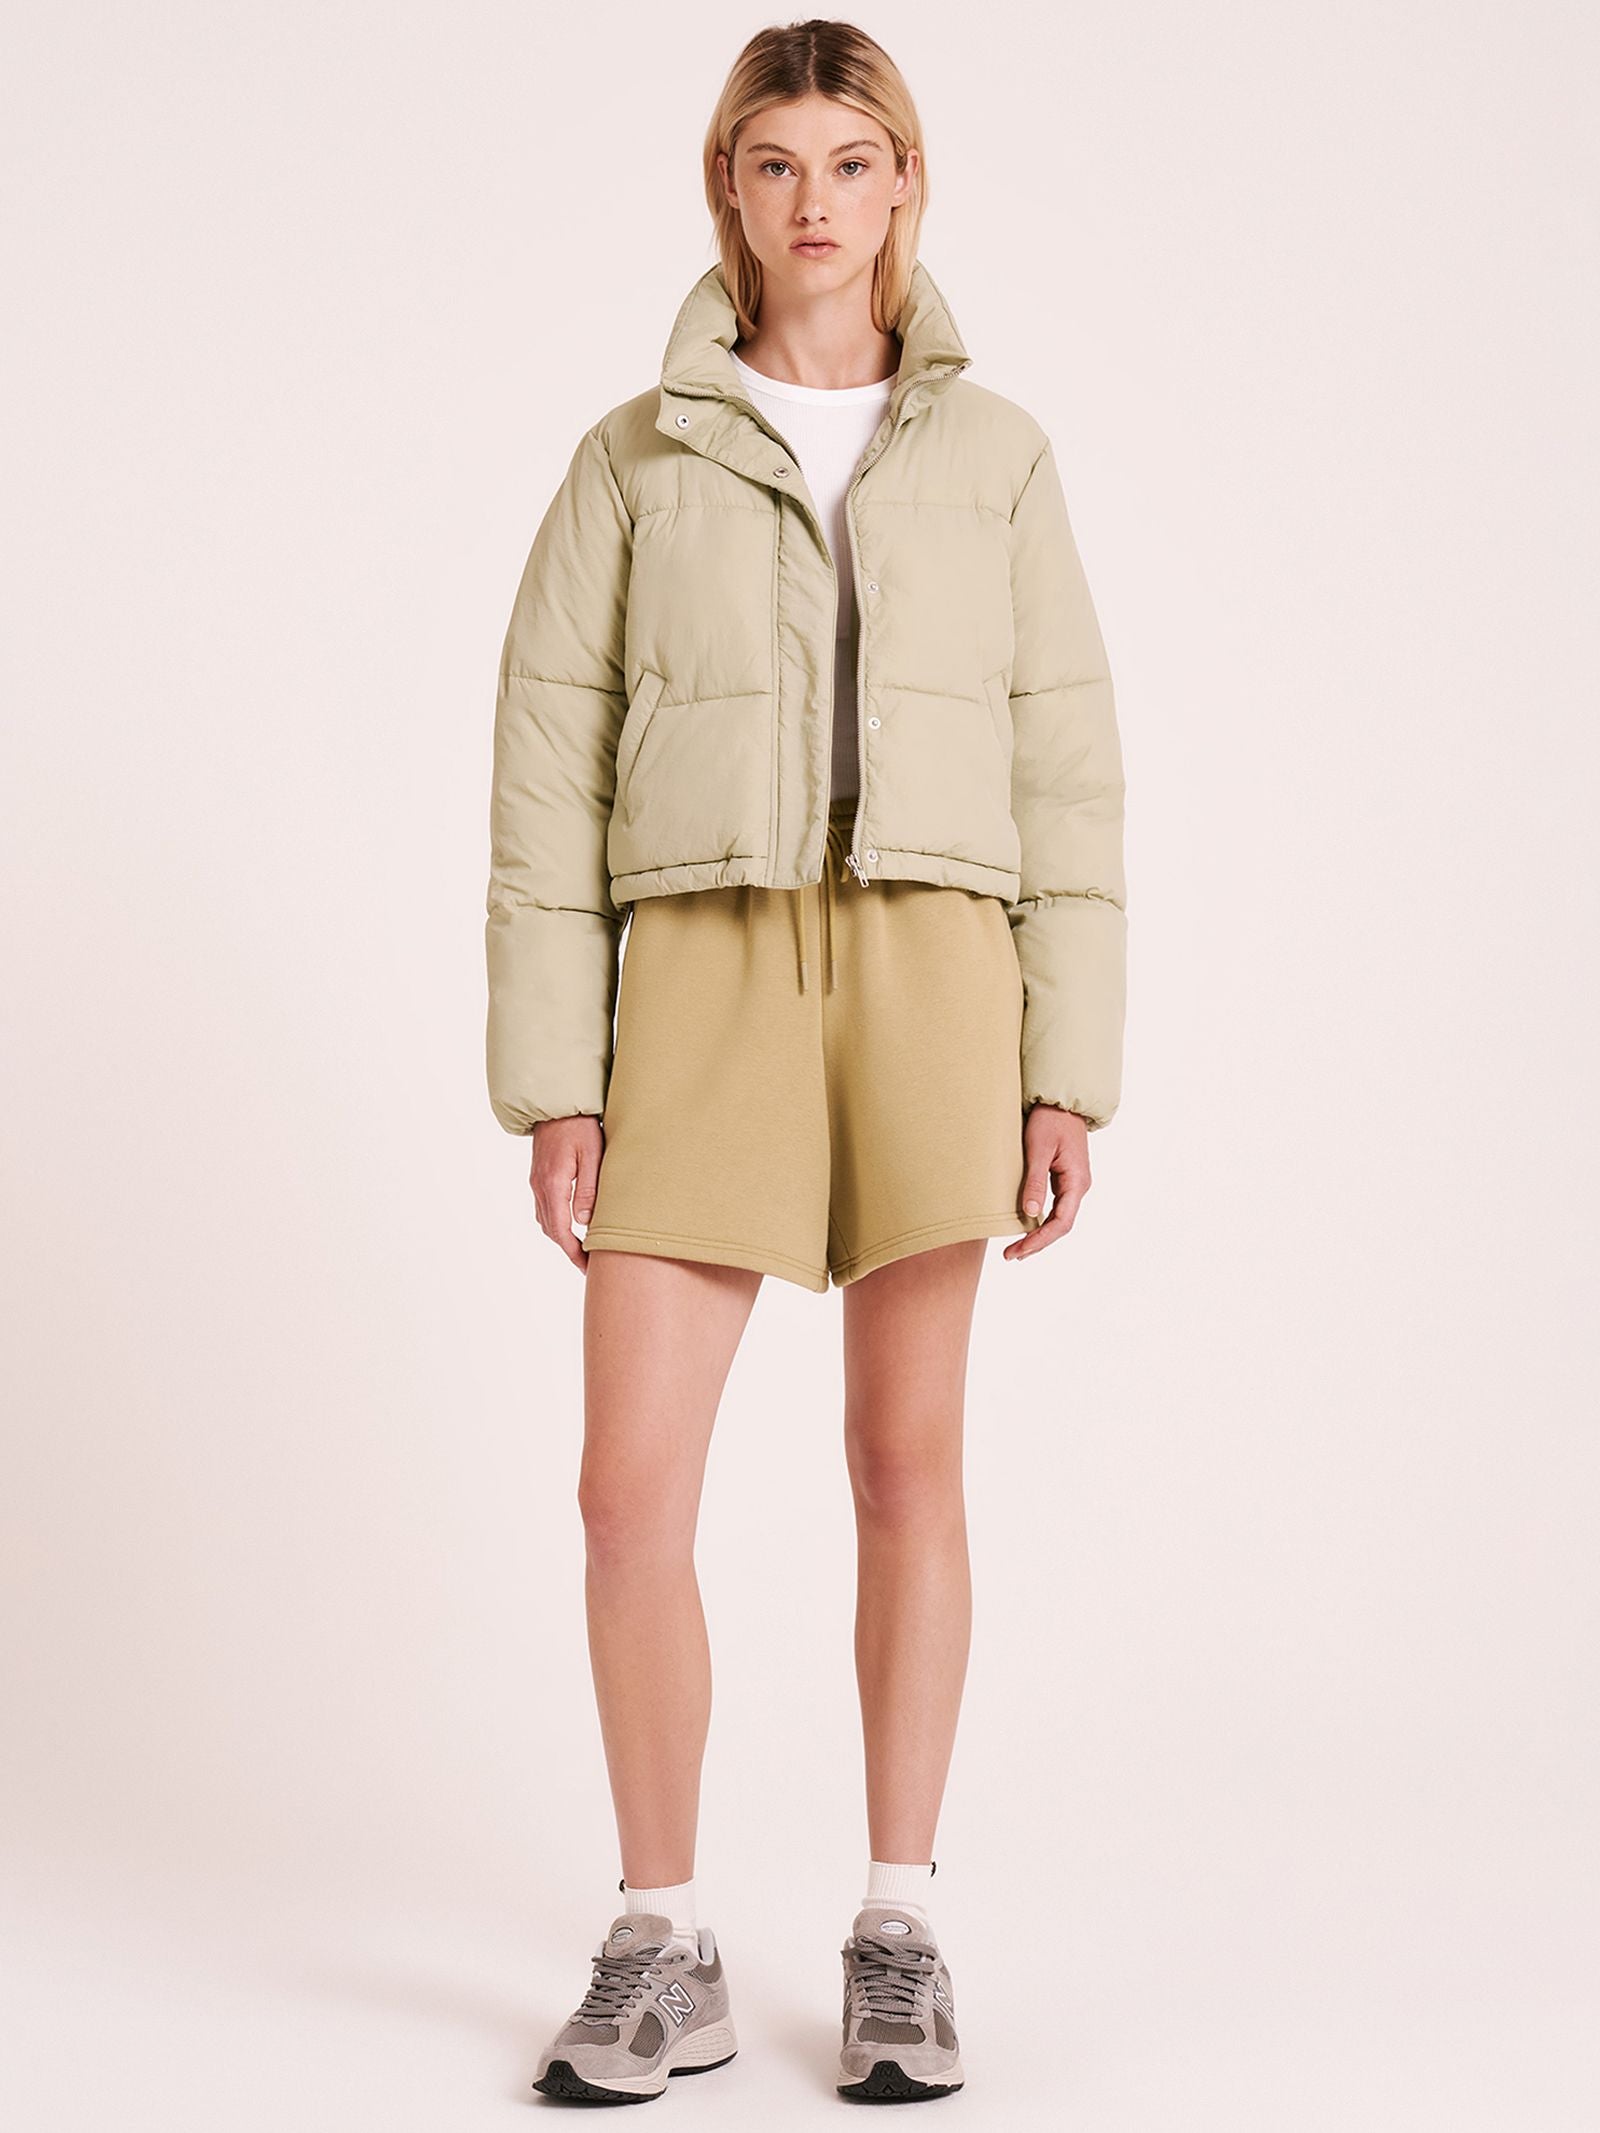 Topher Puffer Jacket